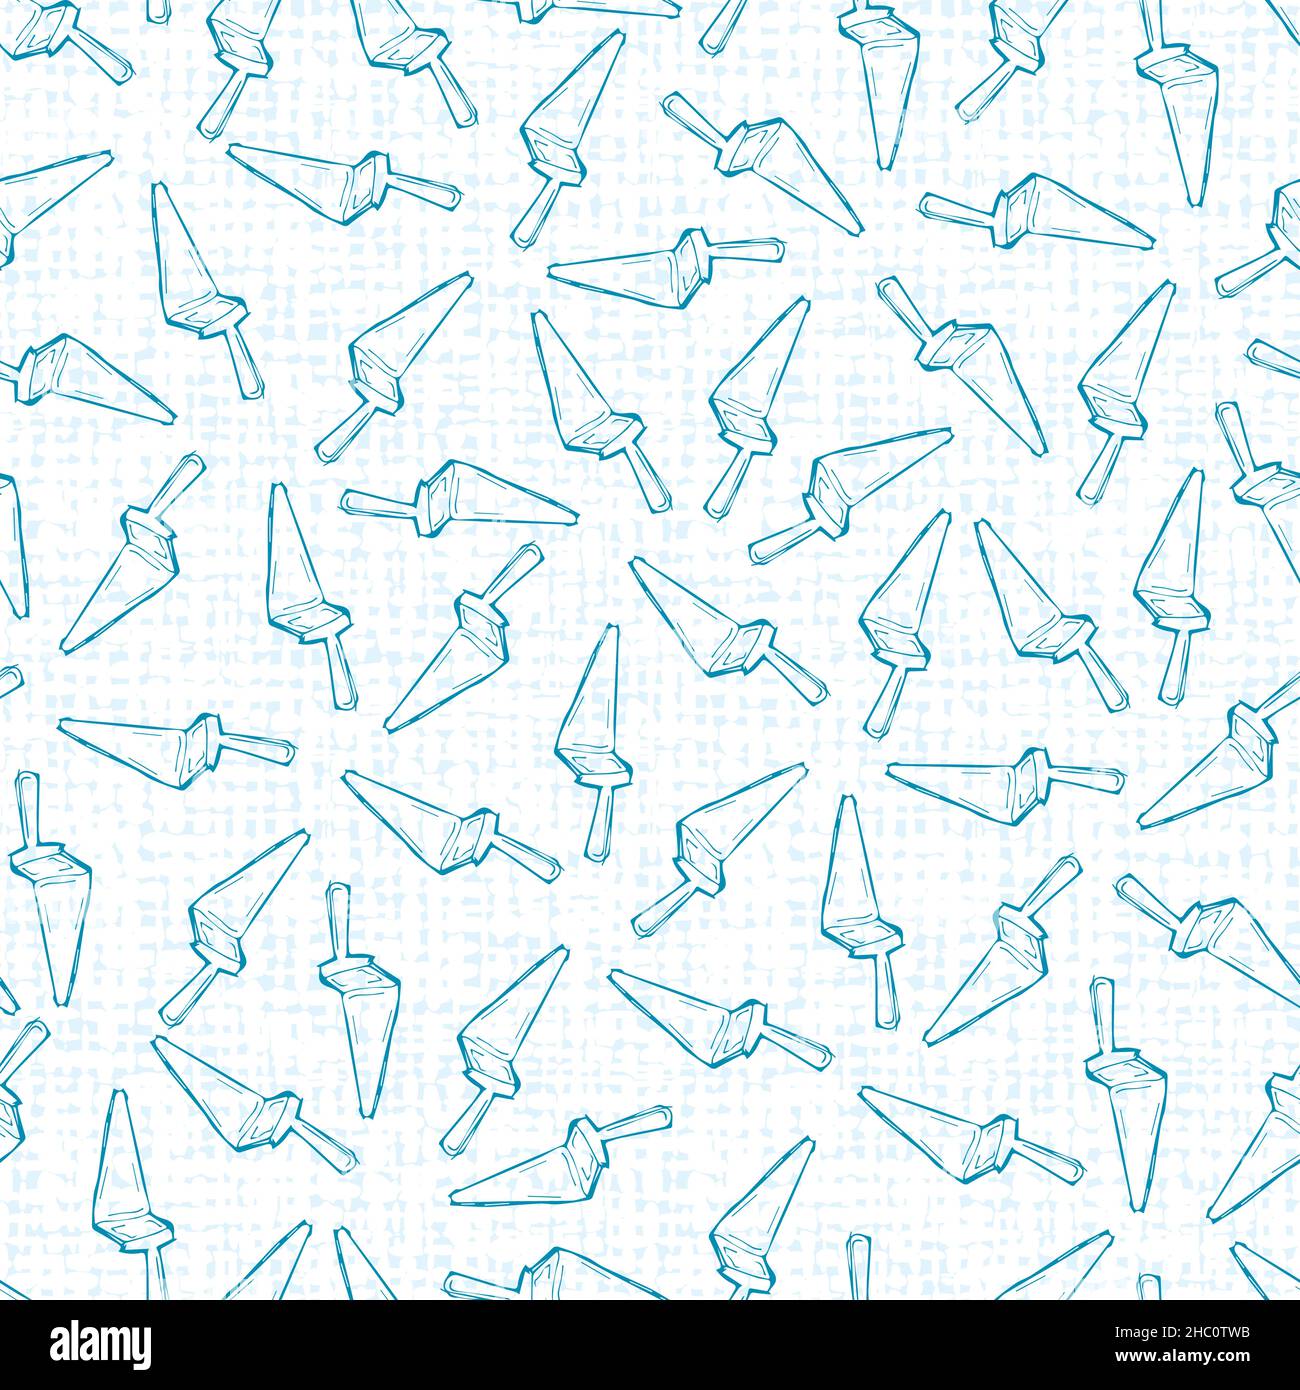 Vector white cake shovel knife simple seamless repeat pattern with canvas background 01. Perfect for fabric, scrapbooking and wallpaper projects. Stock Vector